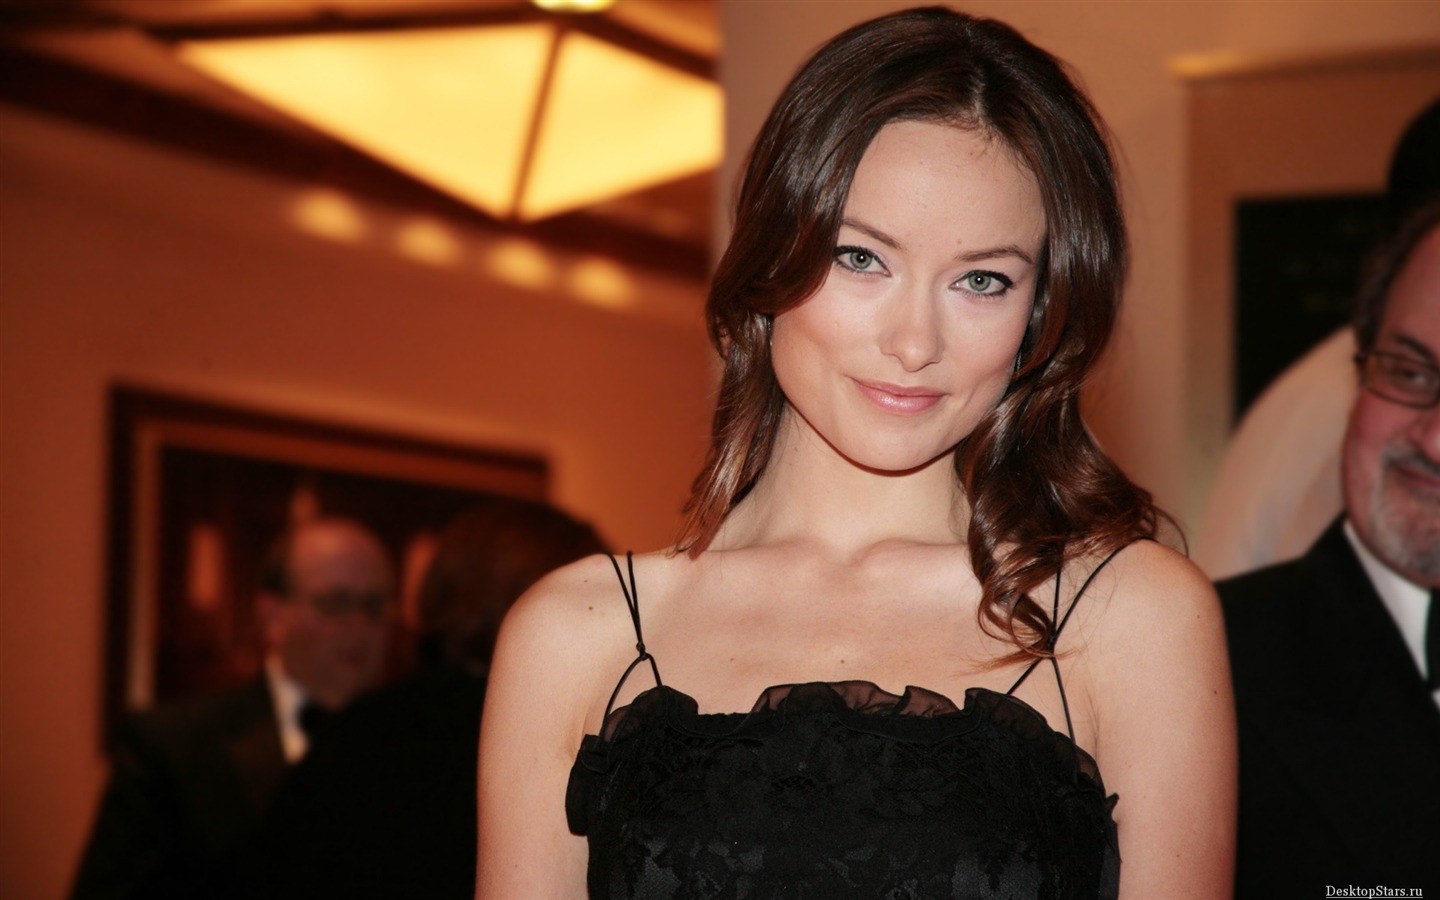 Olivia Wilde #032 - 1440x900 Wallpapers Pictures Photos Images